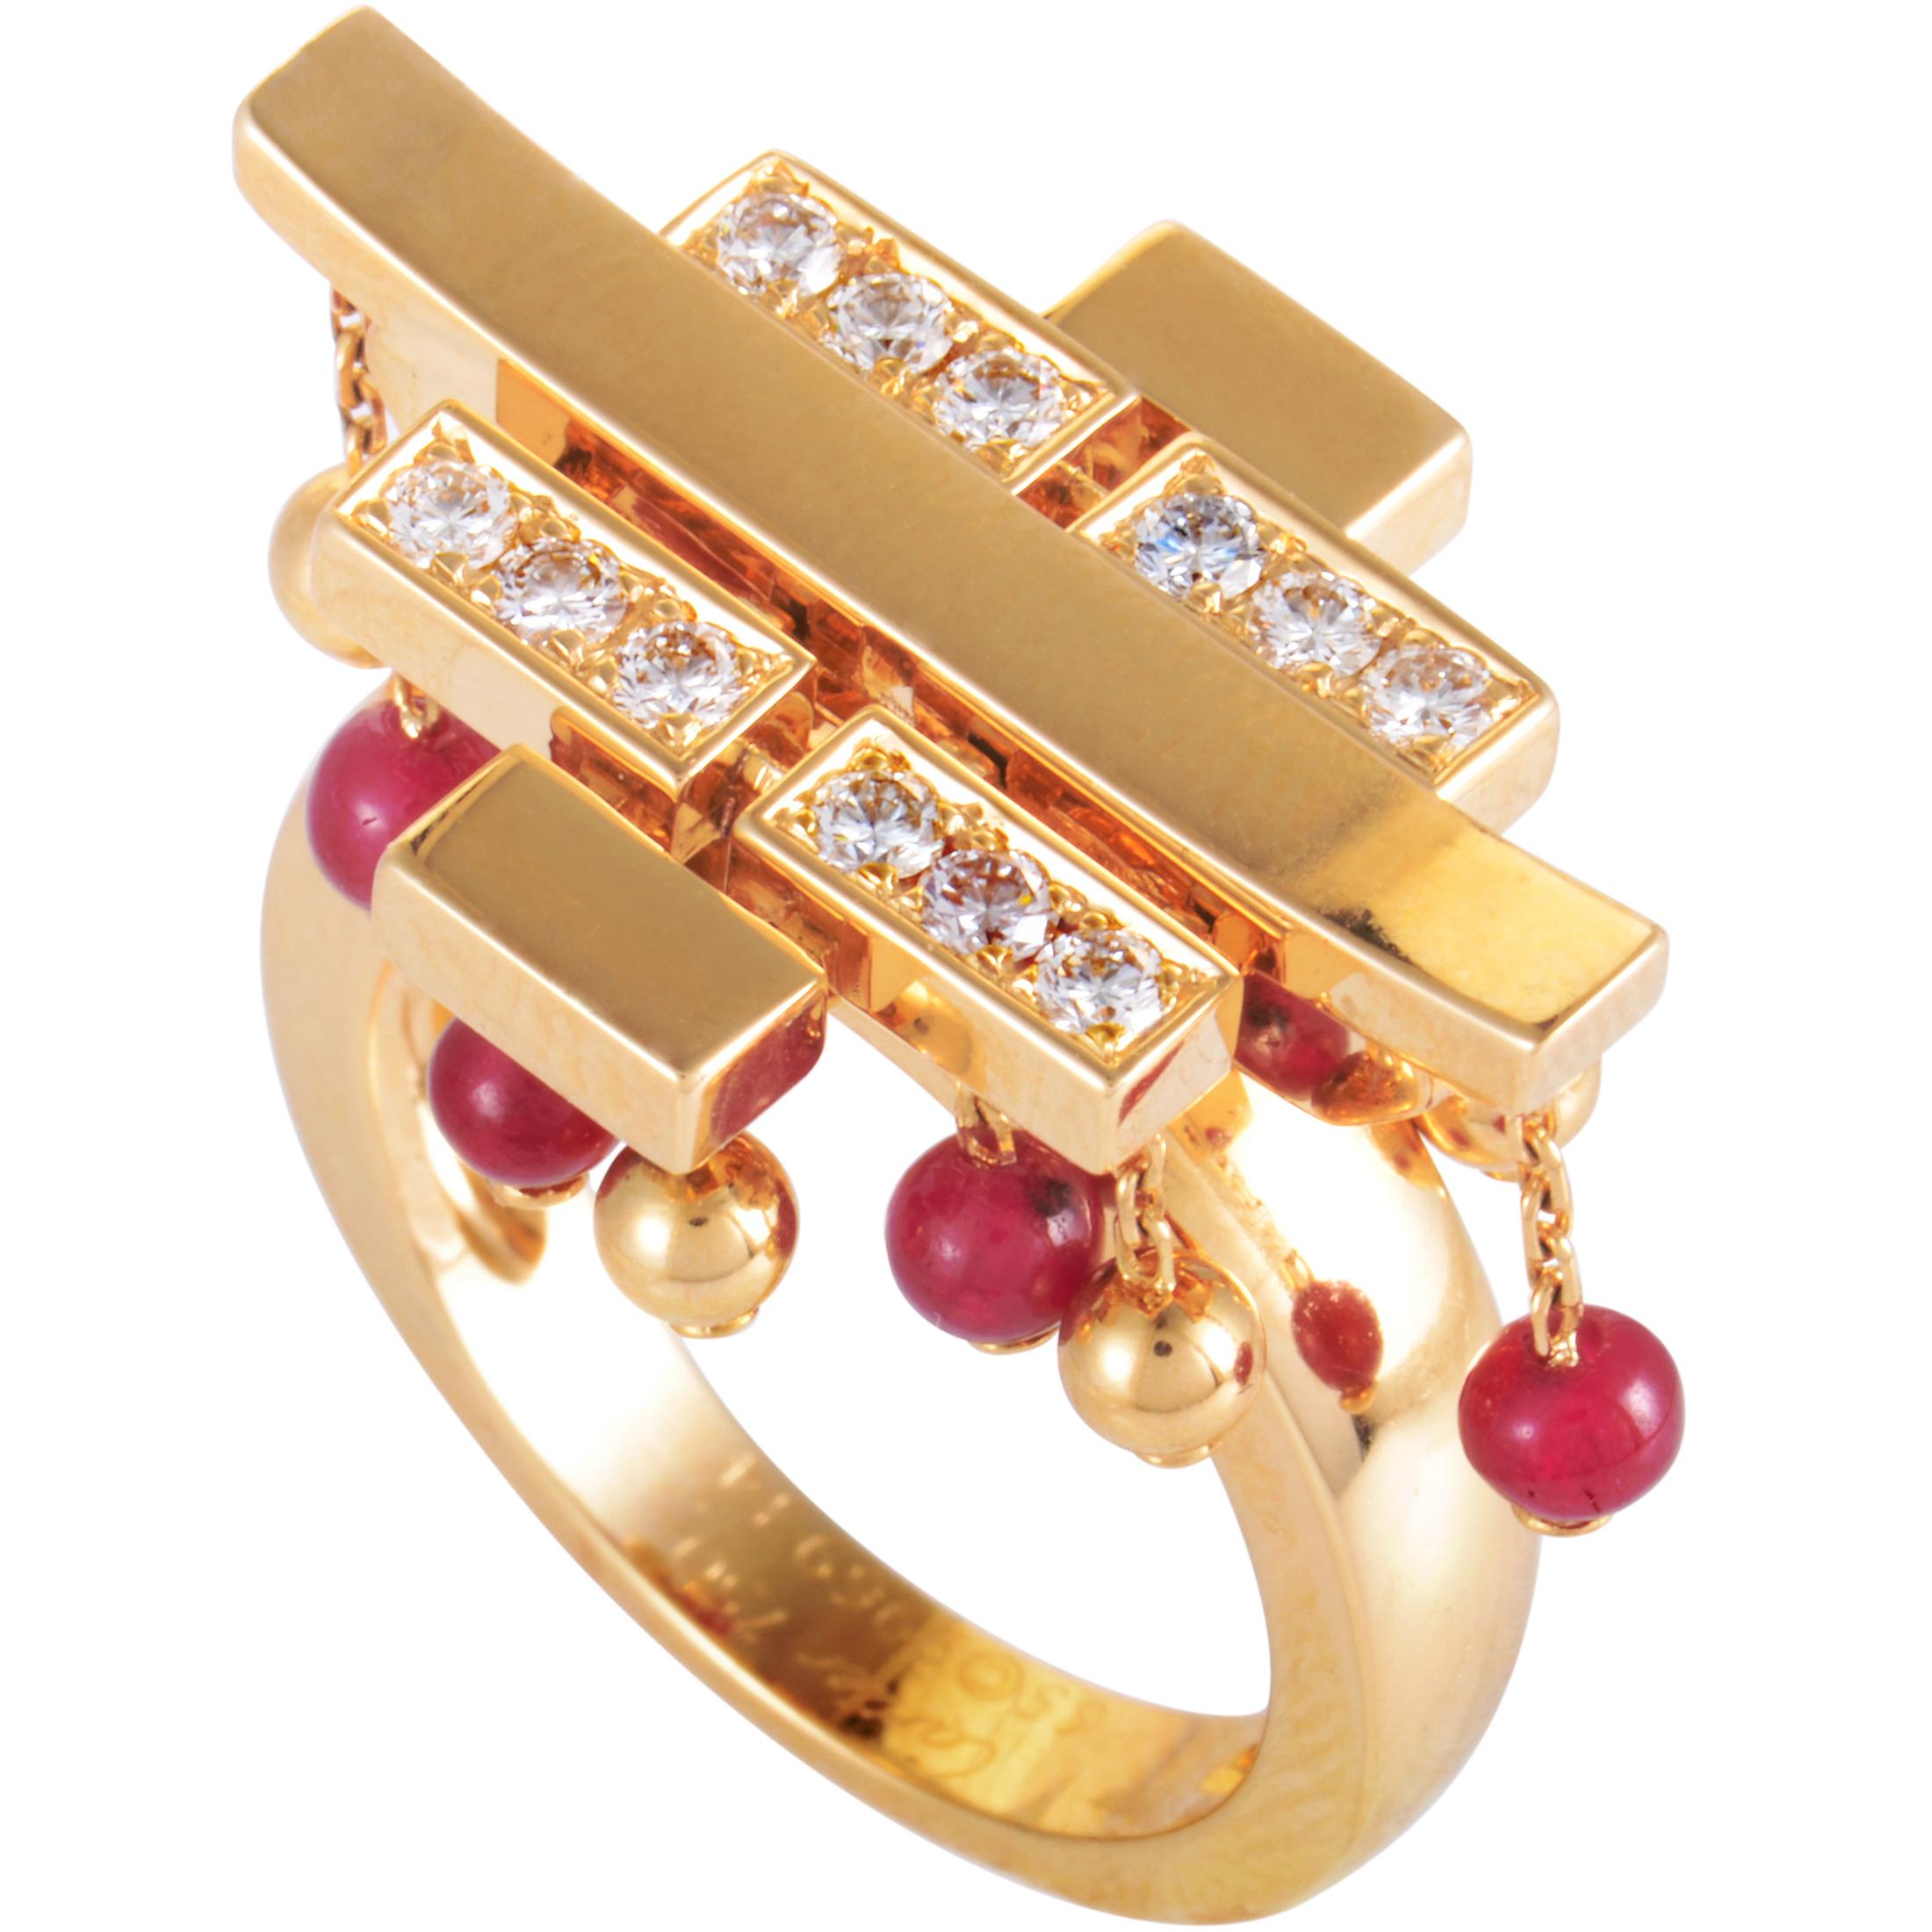 Cartier Le Baiser du Dragon Diamond Pave and Ruby Yellow Gold Tassel Ring